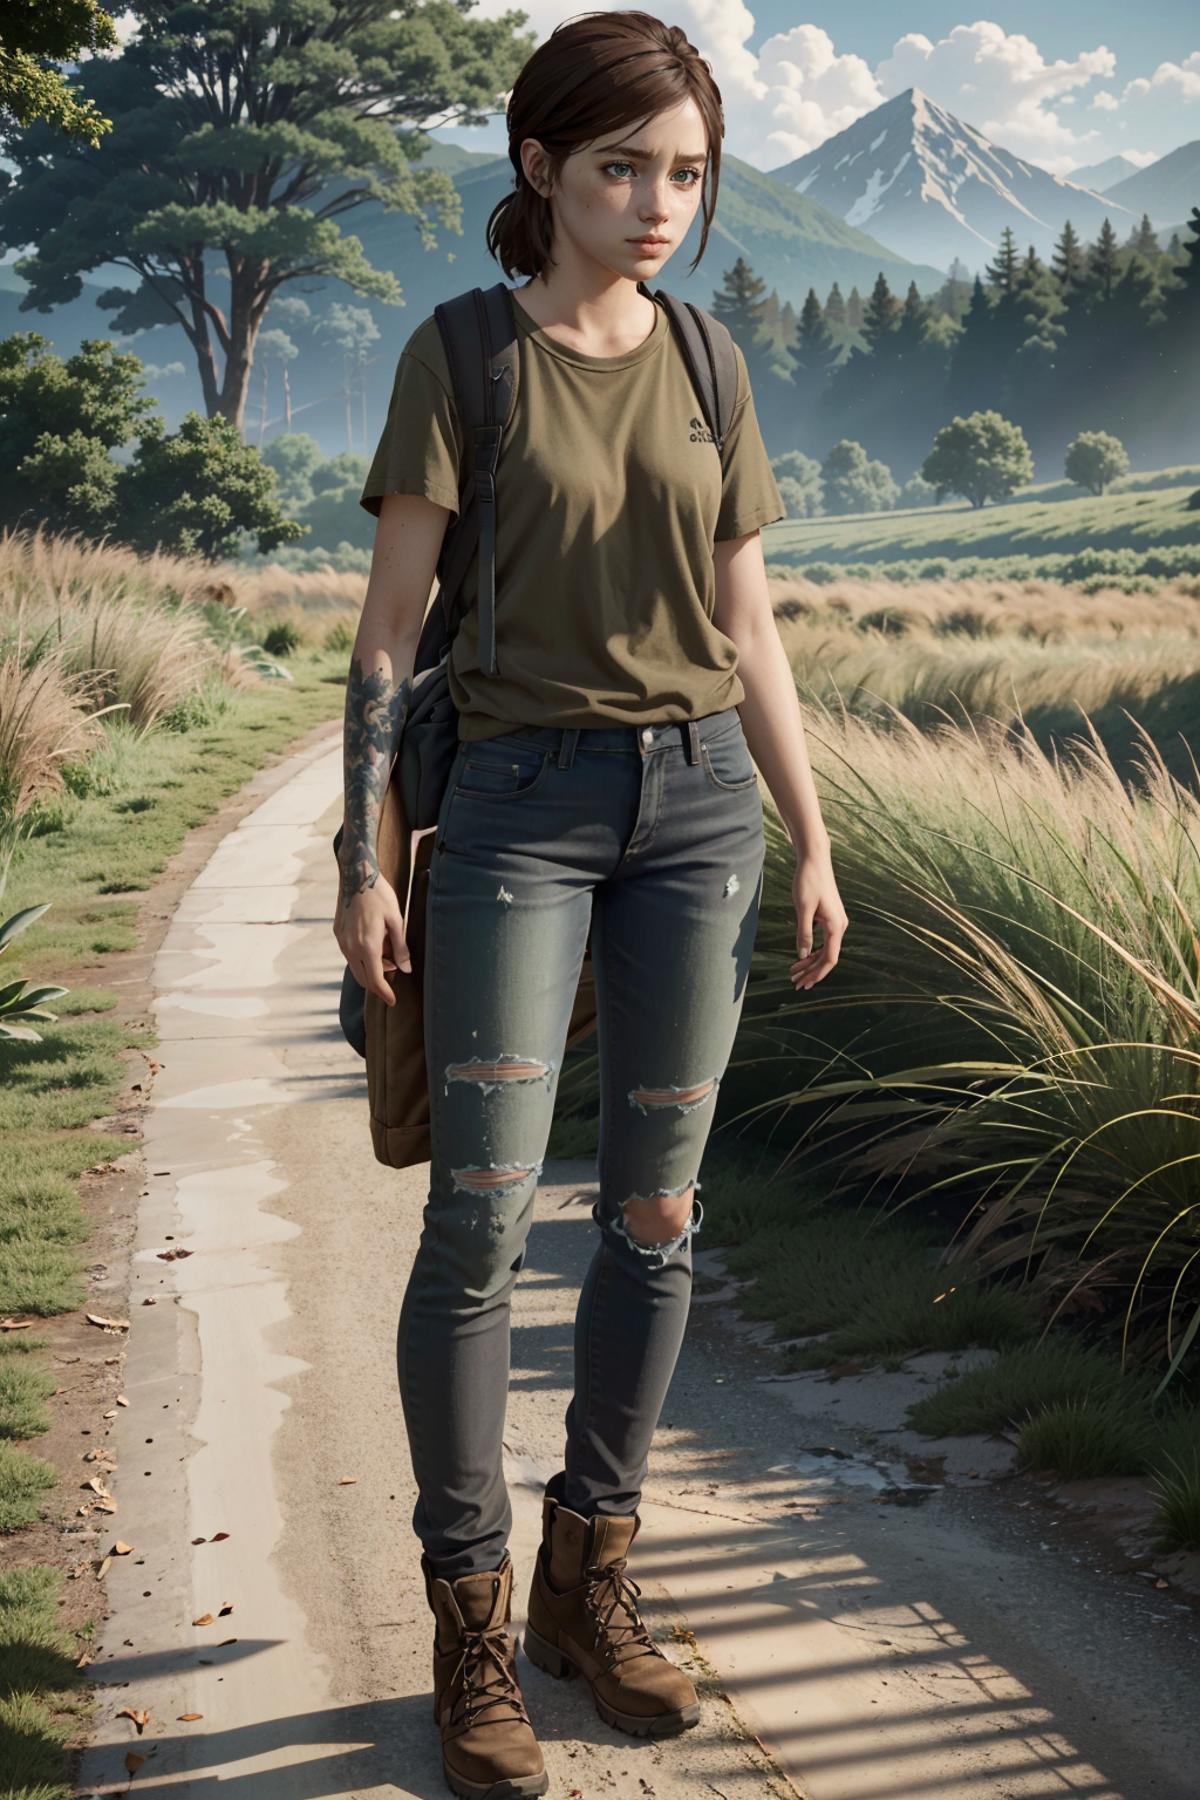 Ellie from The Last of Us 2 image by BloodRedKittie